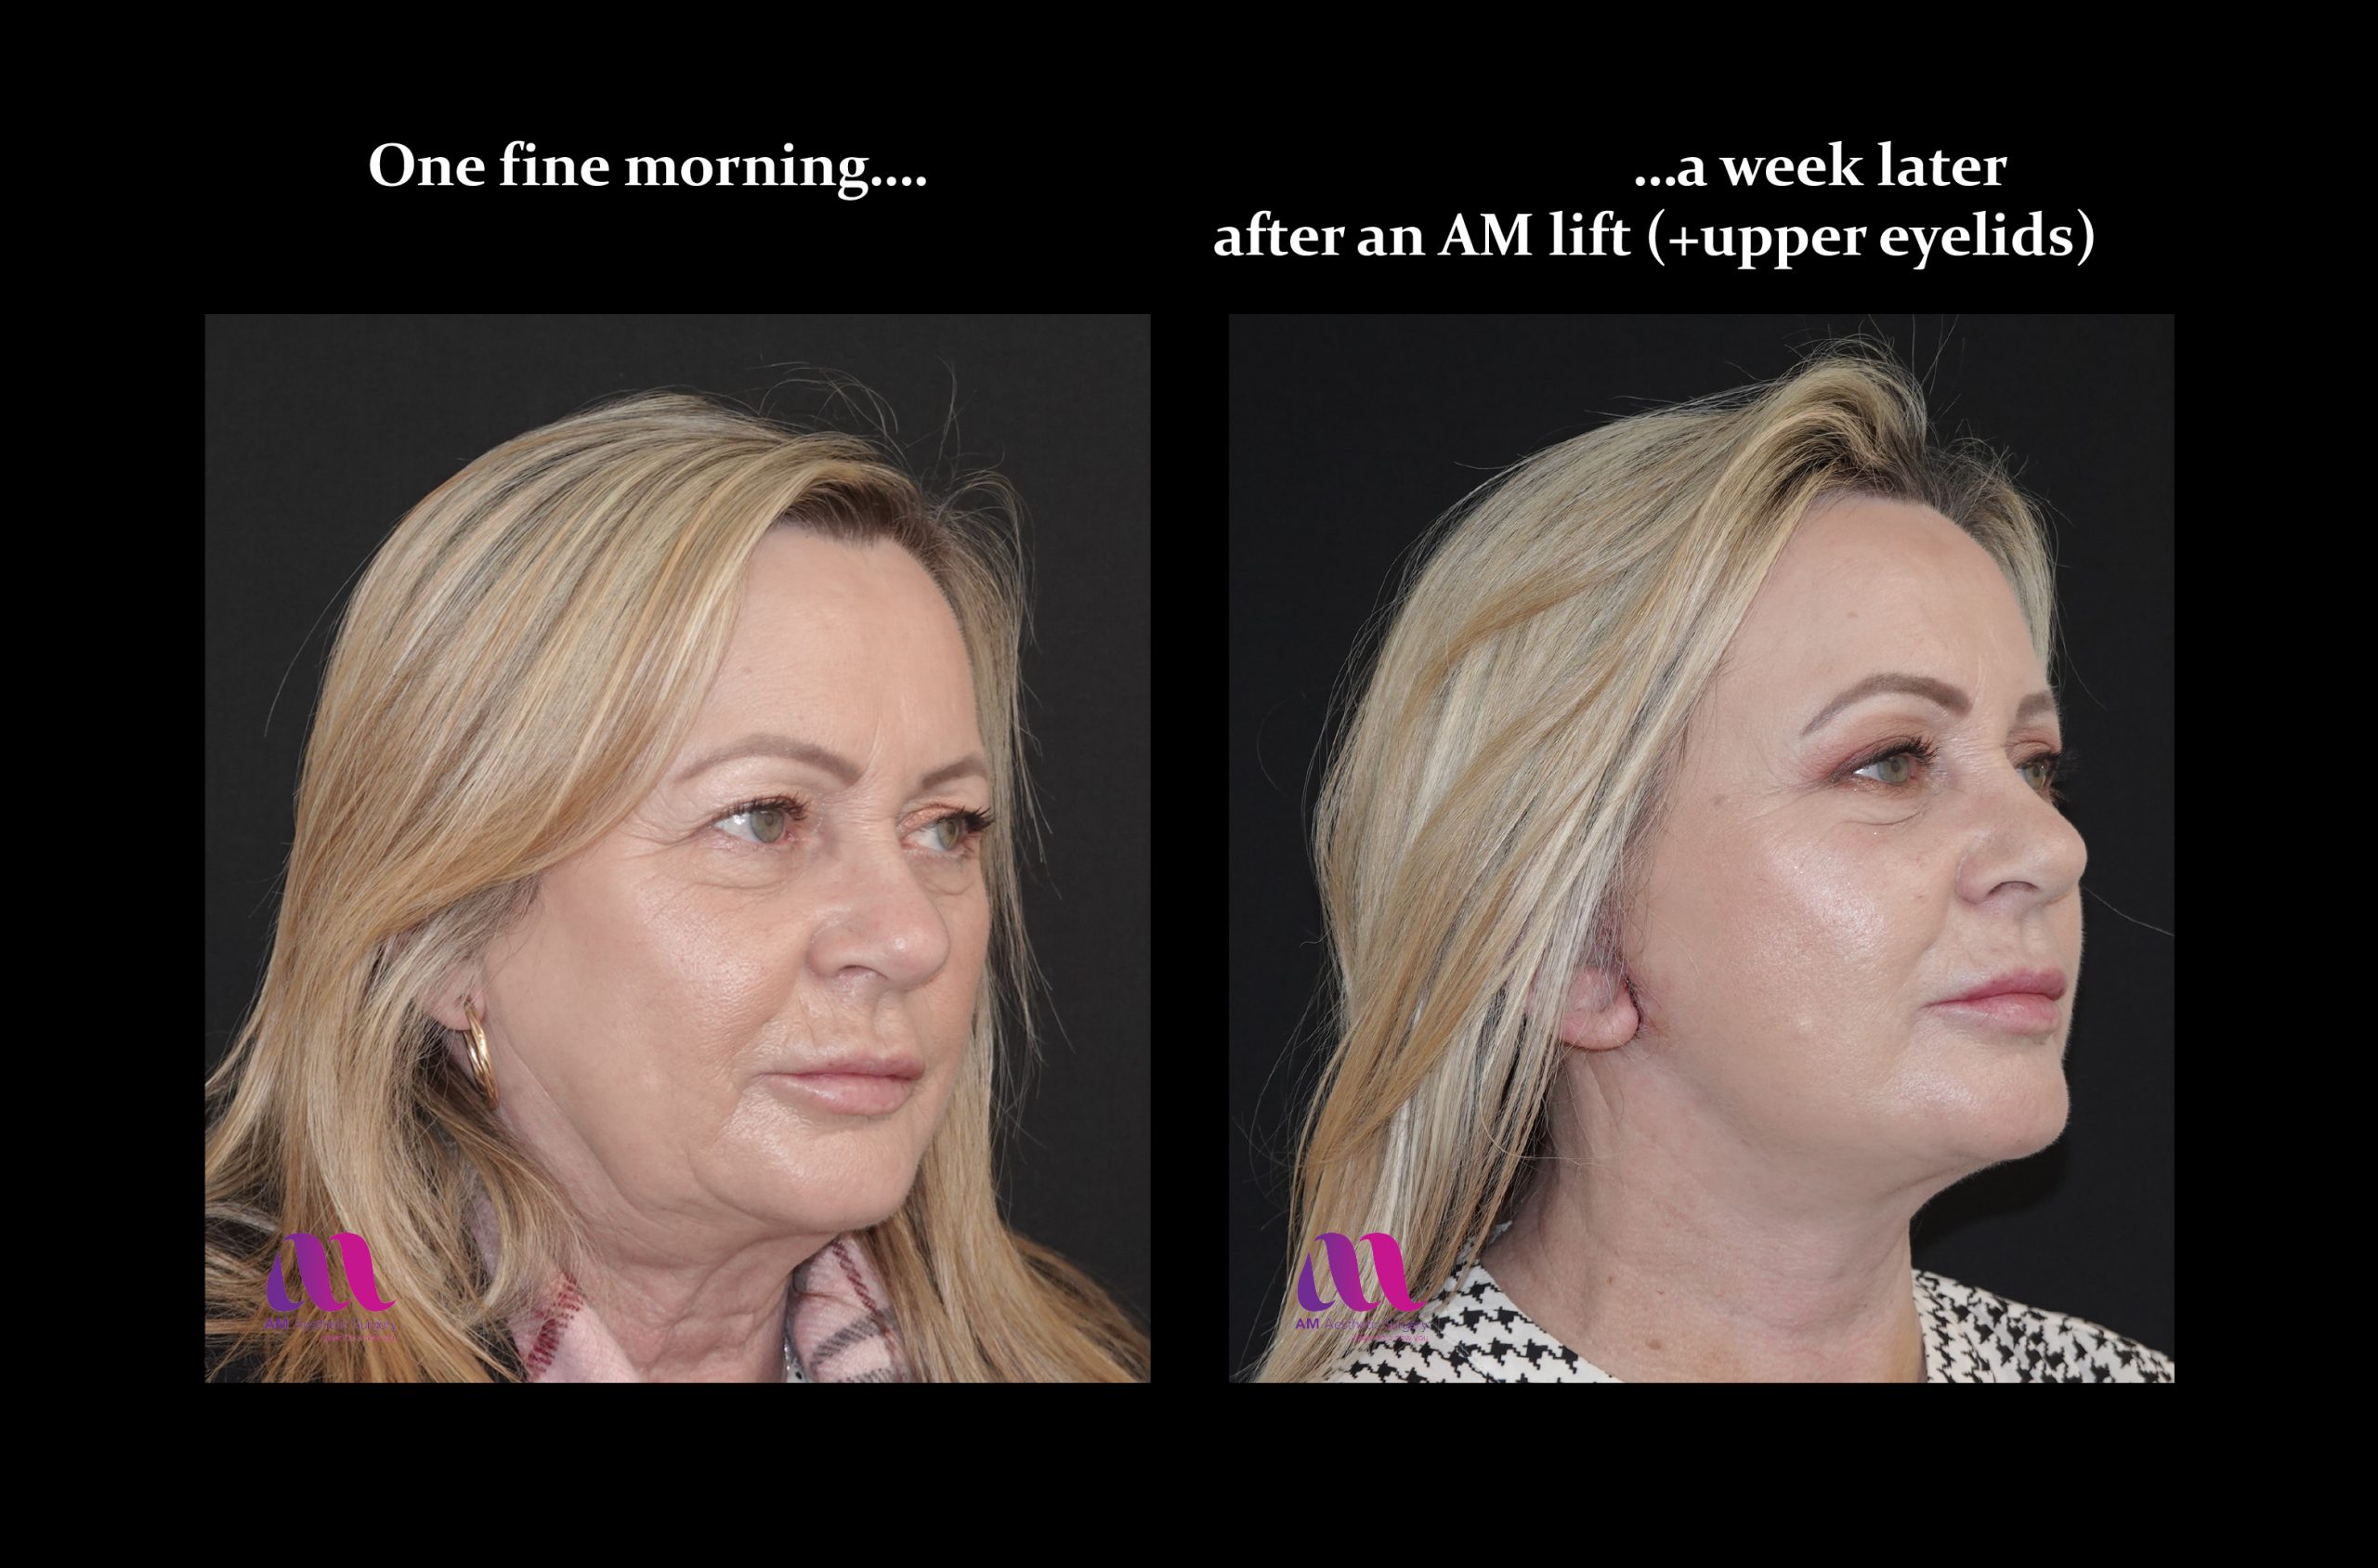 Gulf Coast Plastic Surgery - This patient is 6 weeks post-op from